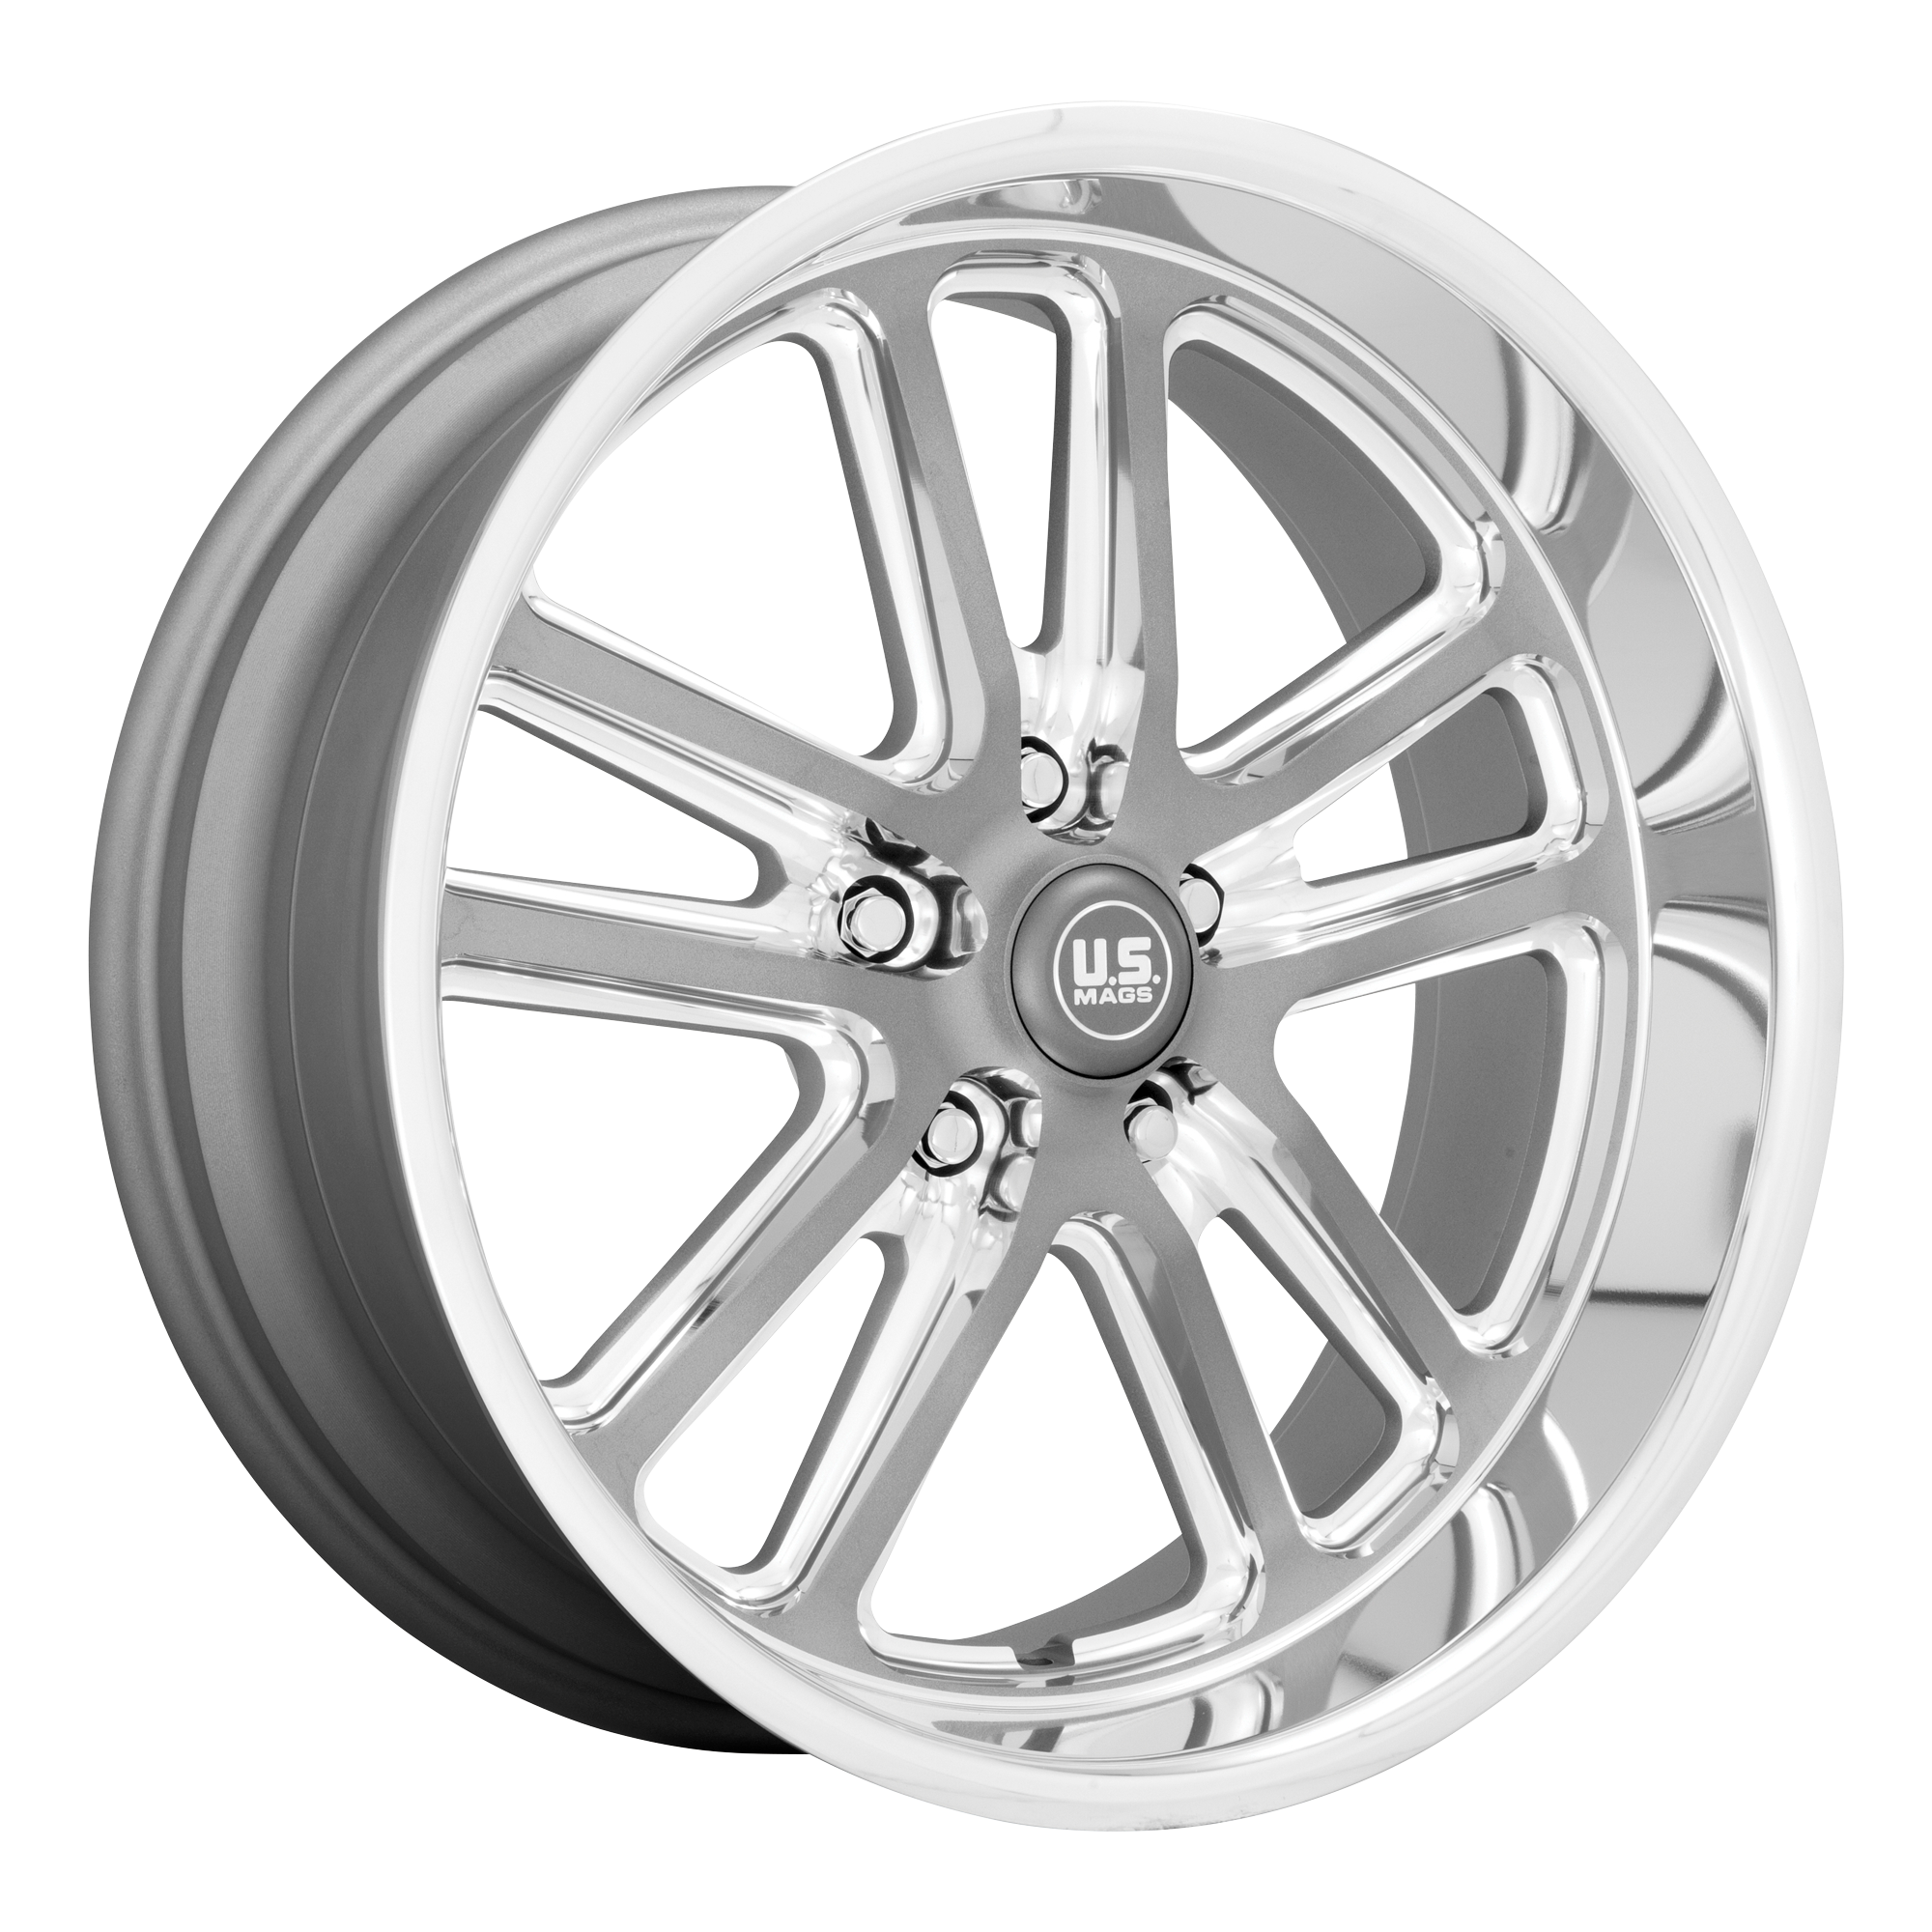 BULLET 20x9.5 5x120.65 TEXTURED GUN METAL W/ MILLED EDGES (1 mm) - Tires and Engine Performance